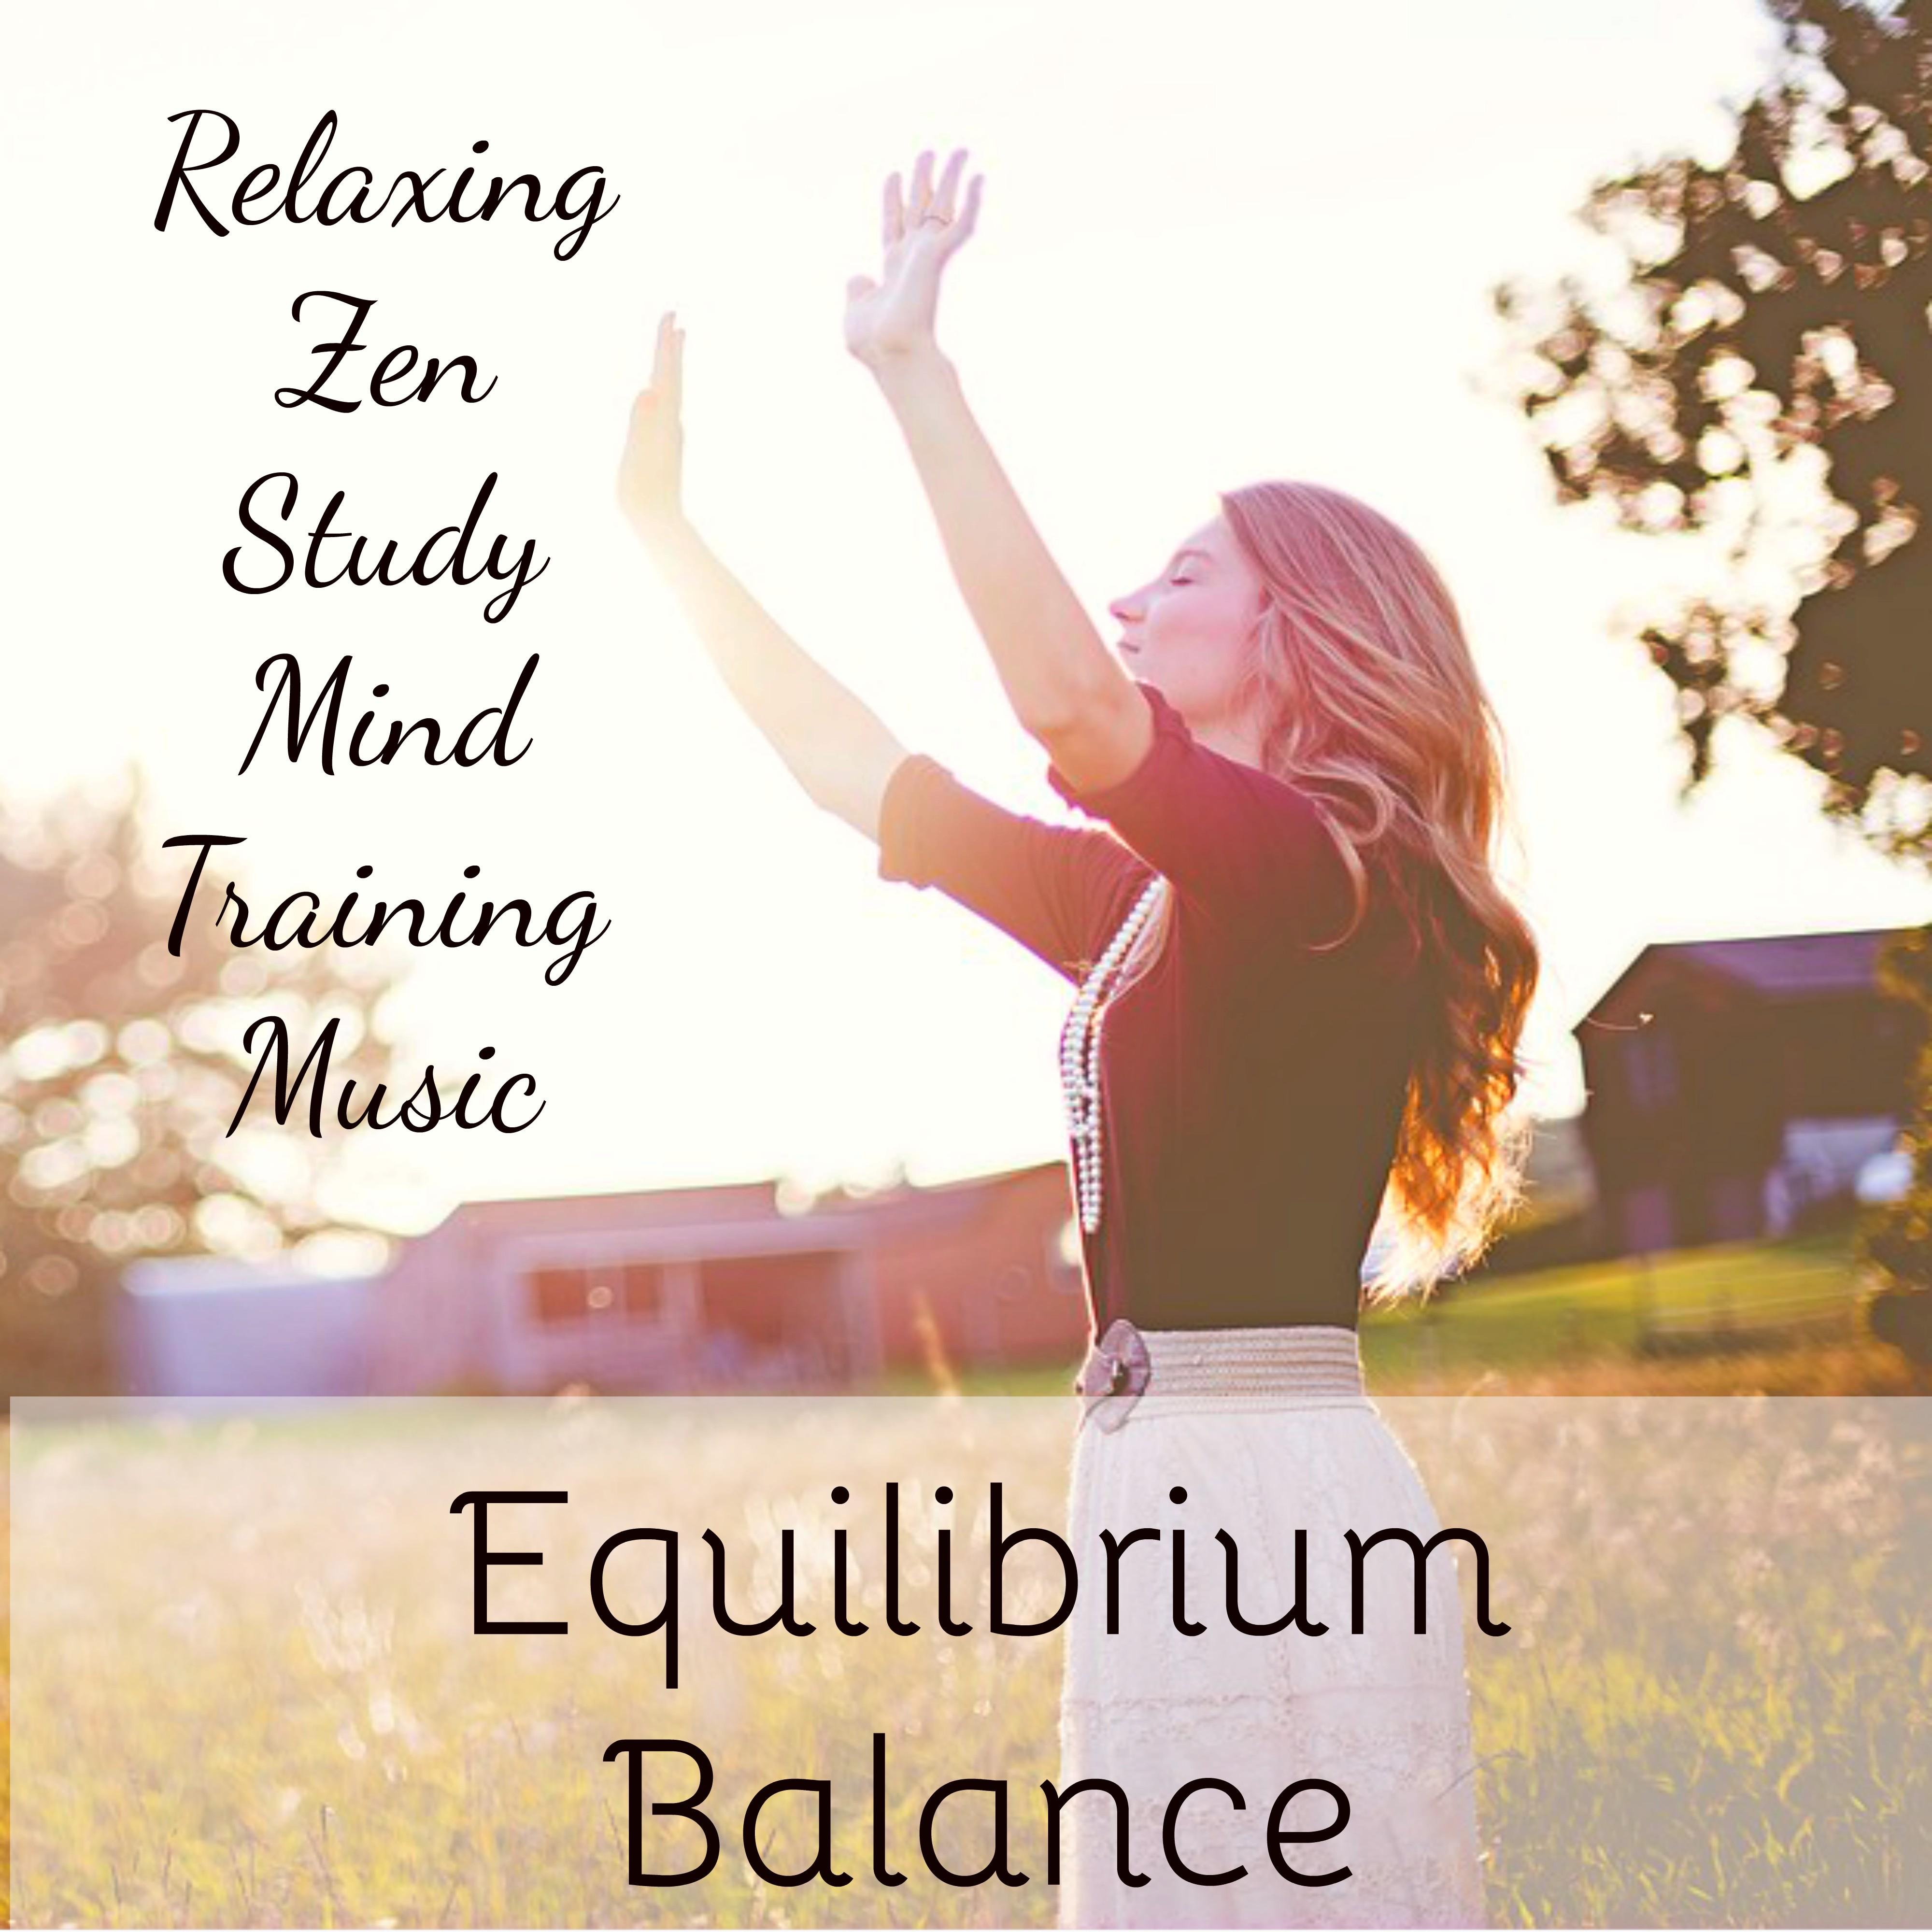 Equilibrium Balance - Relaxing Zen Study Mind Training Music for Deep Concentration Light Life Positive Moment with Nature New Age Ambient Soft Sounds